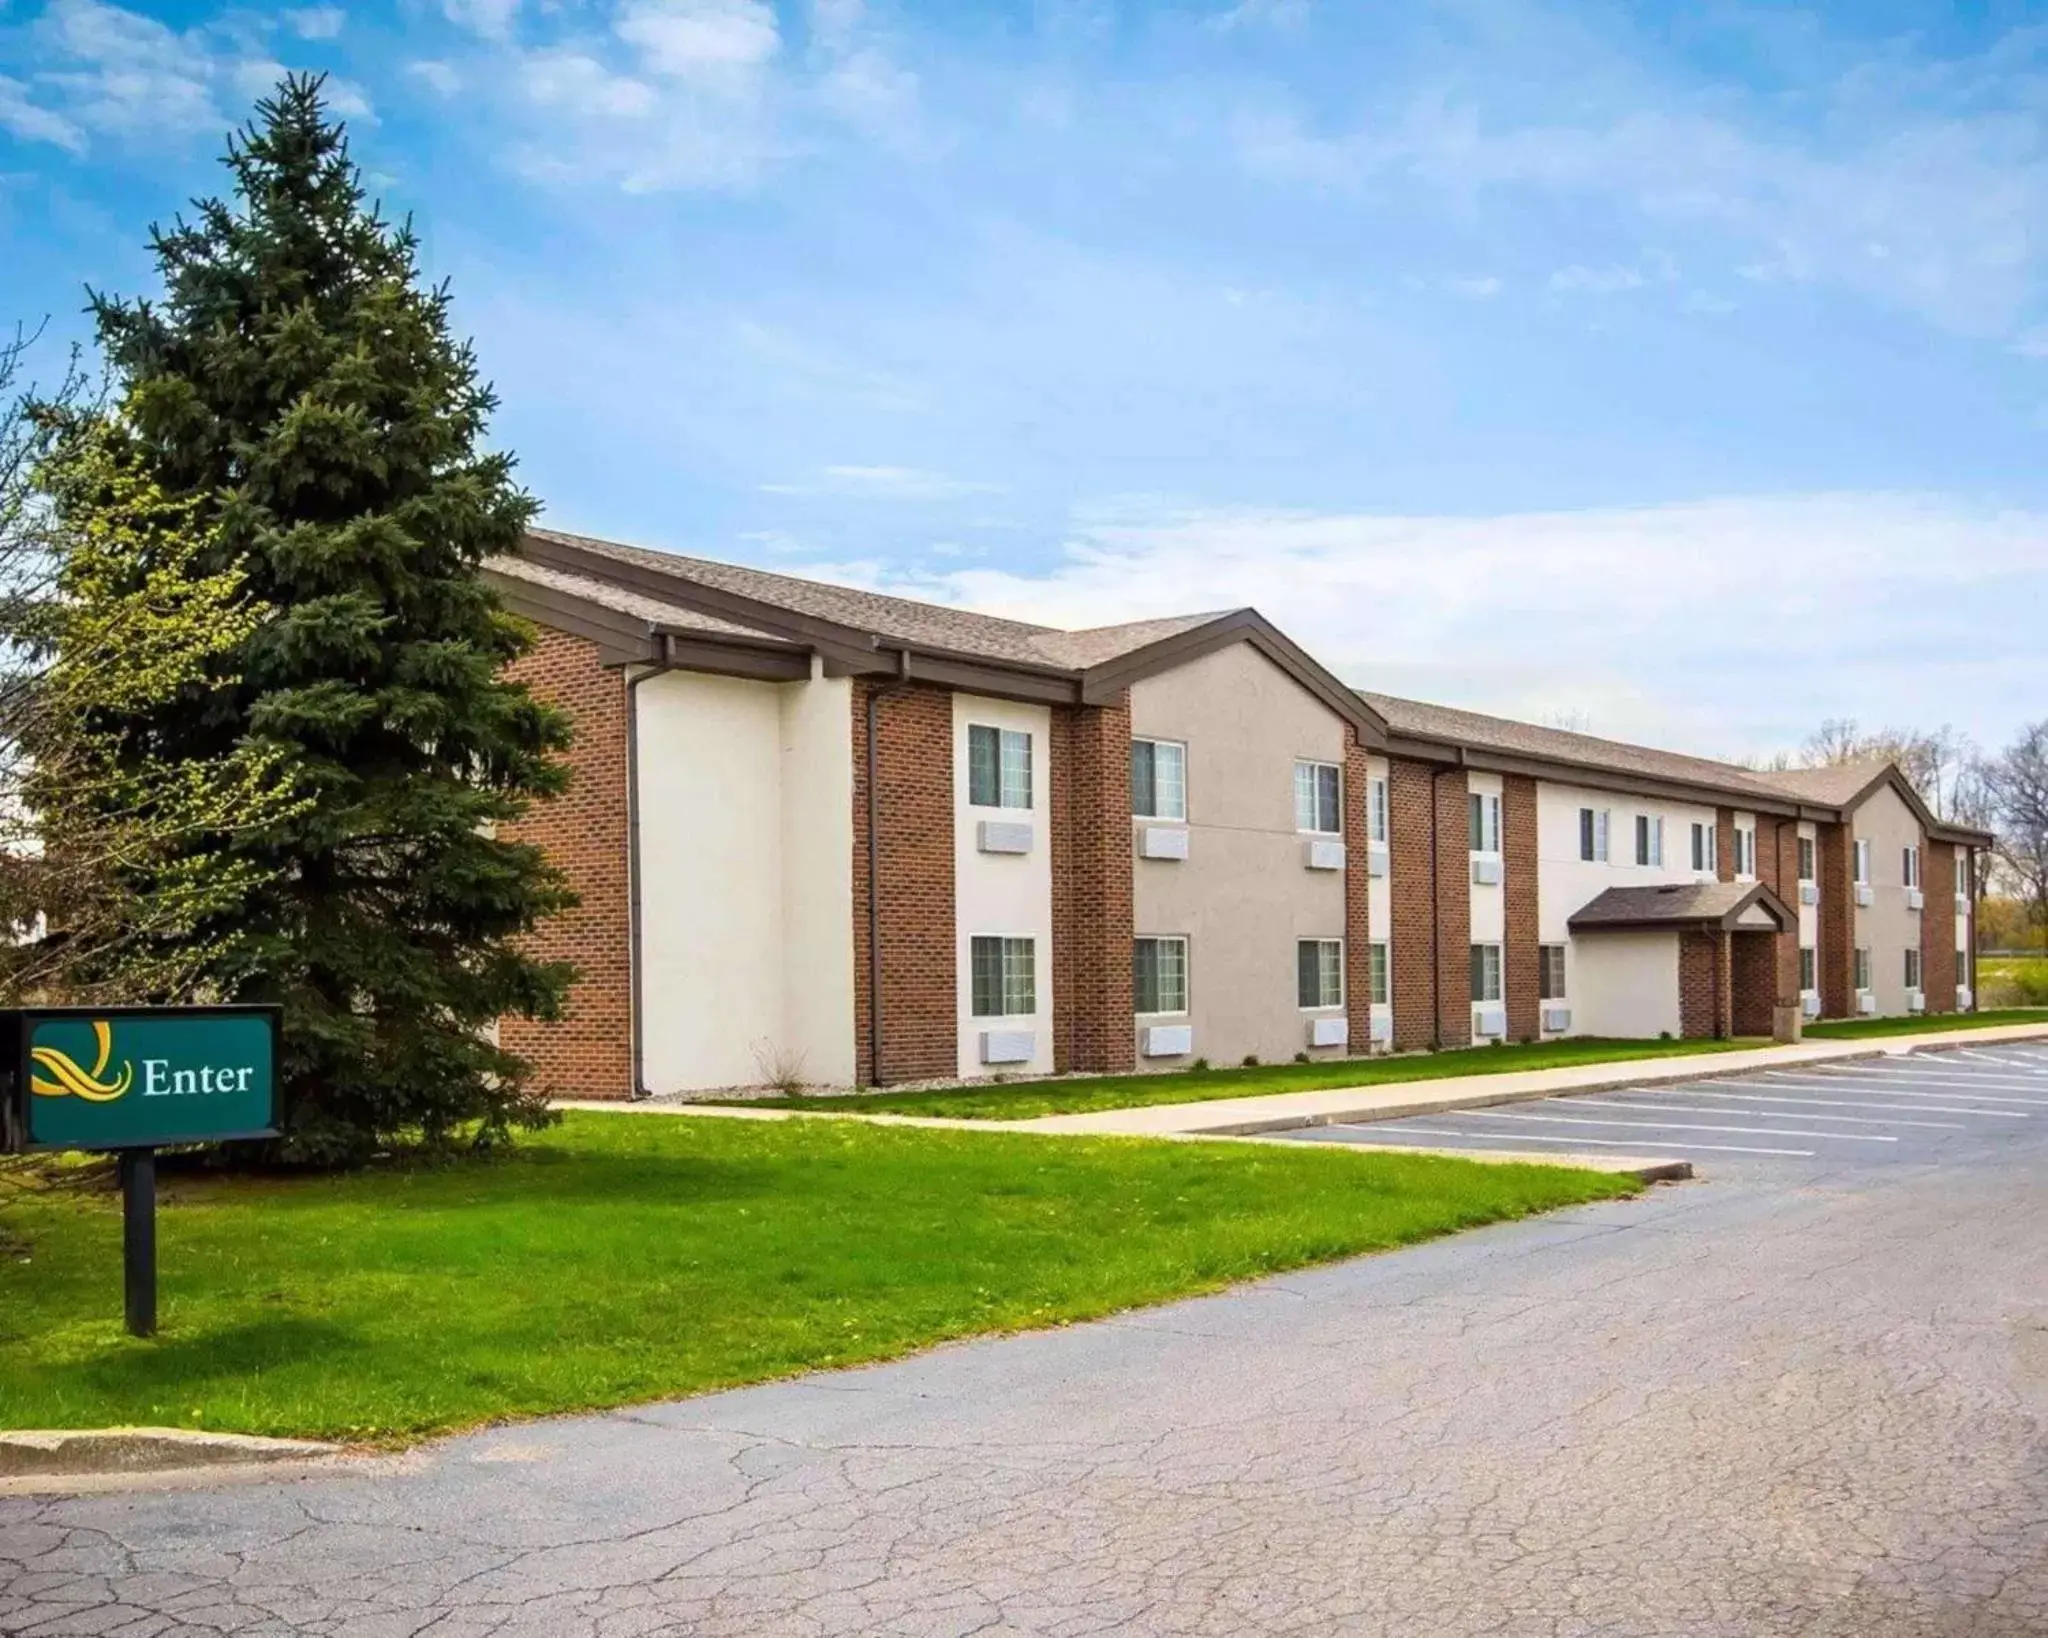 Property building in Quality Inn Chesterton near Indiana Dunes National Park I-94